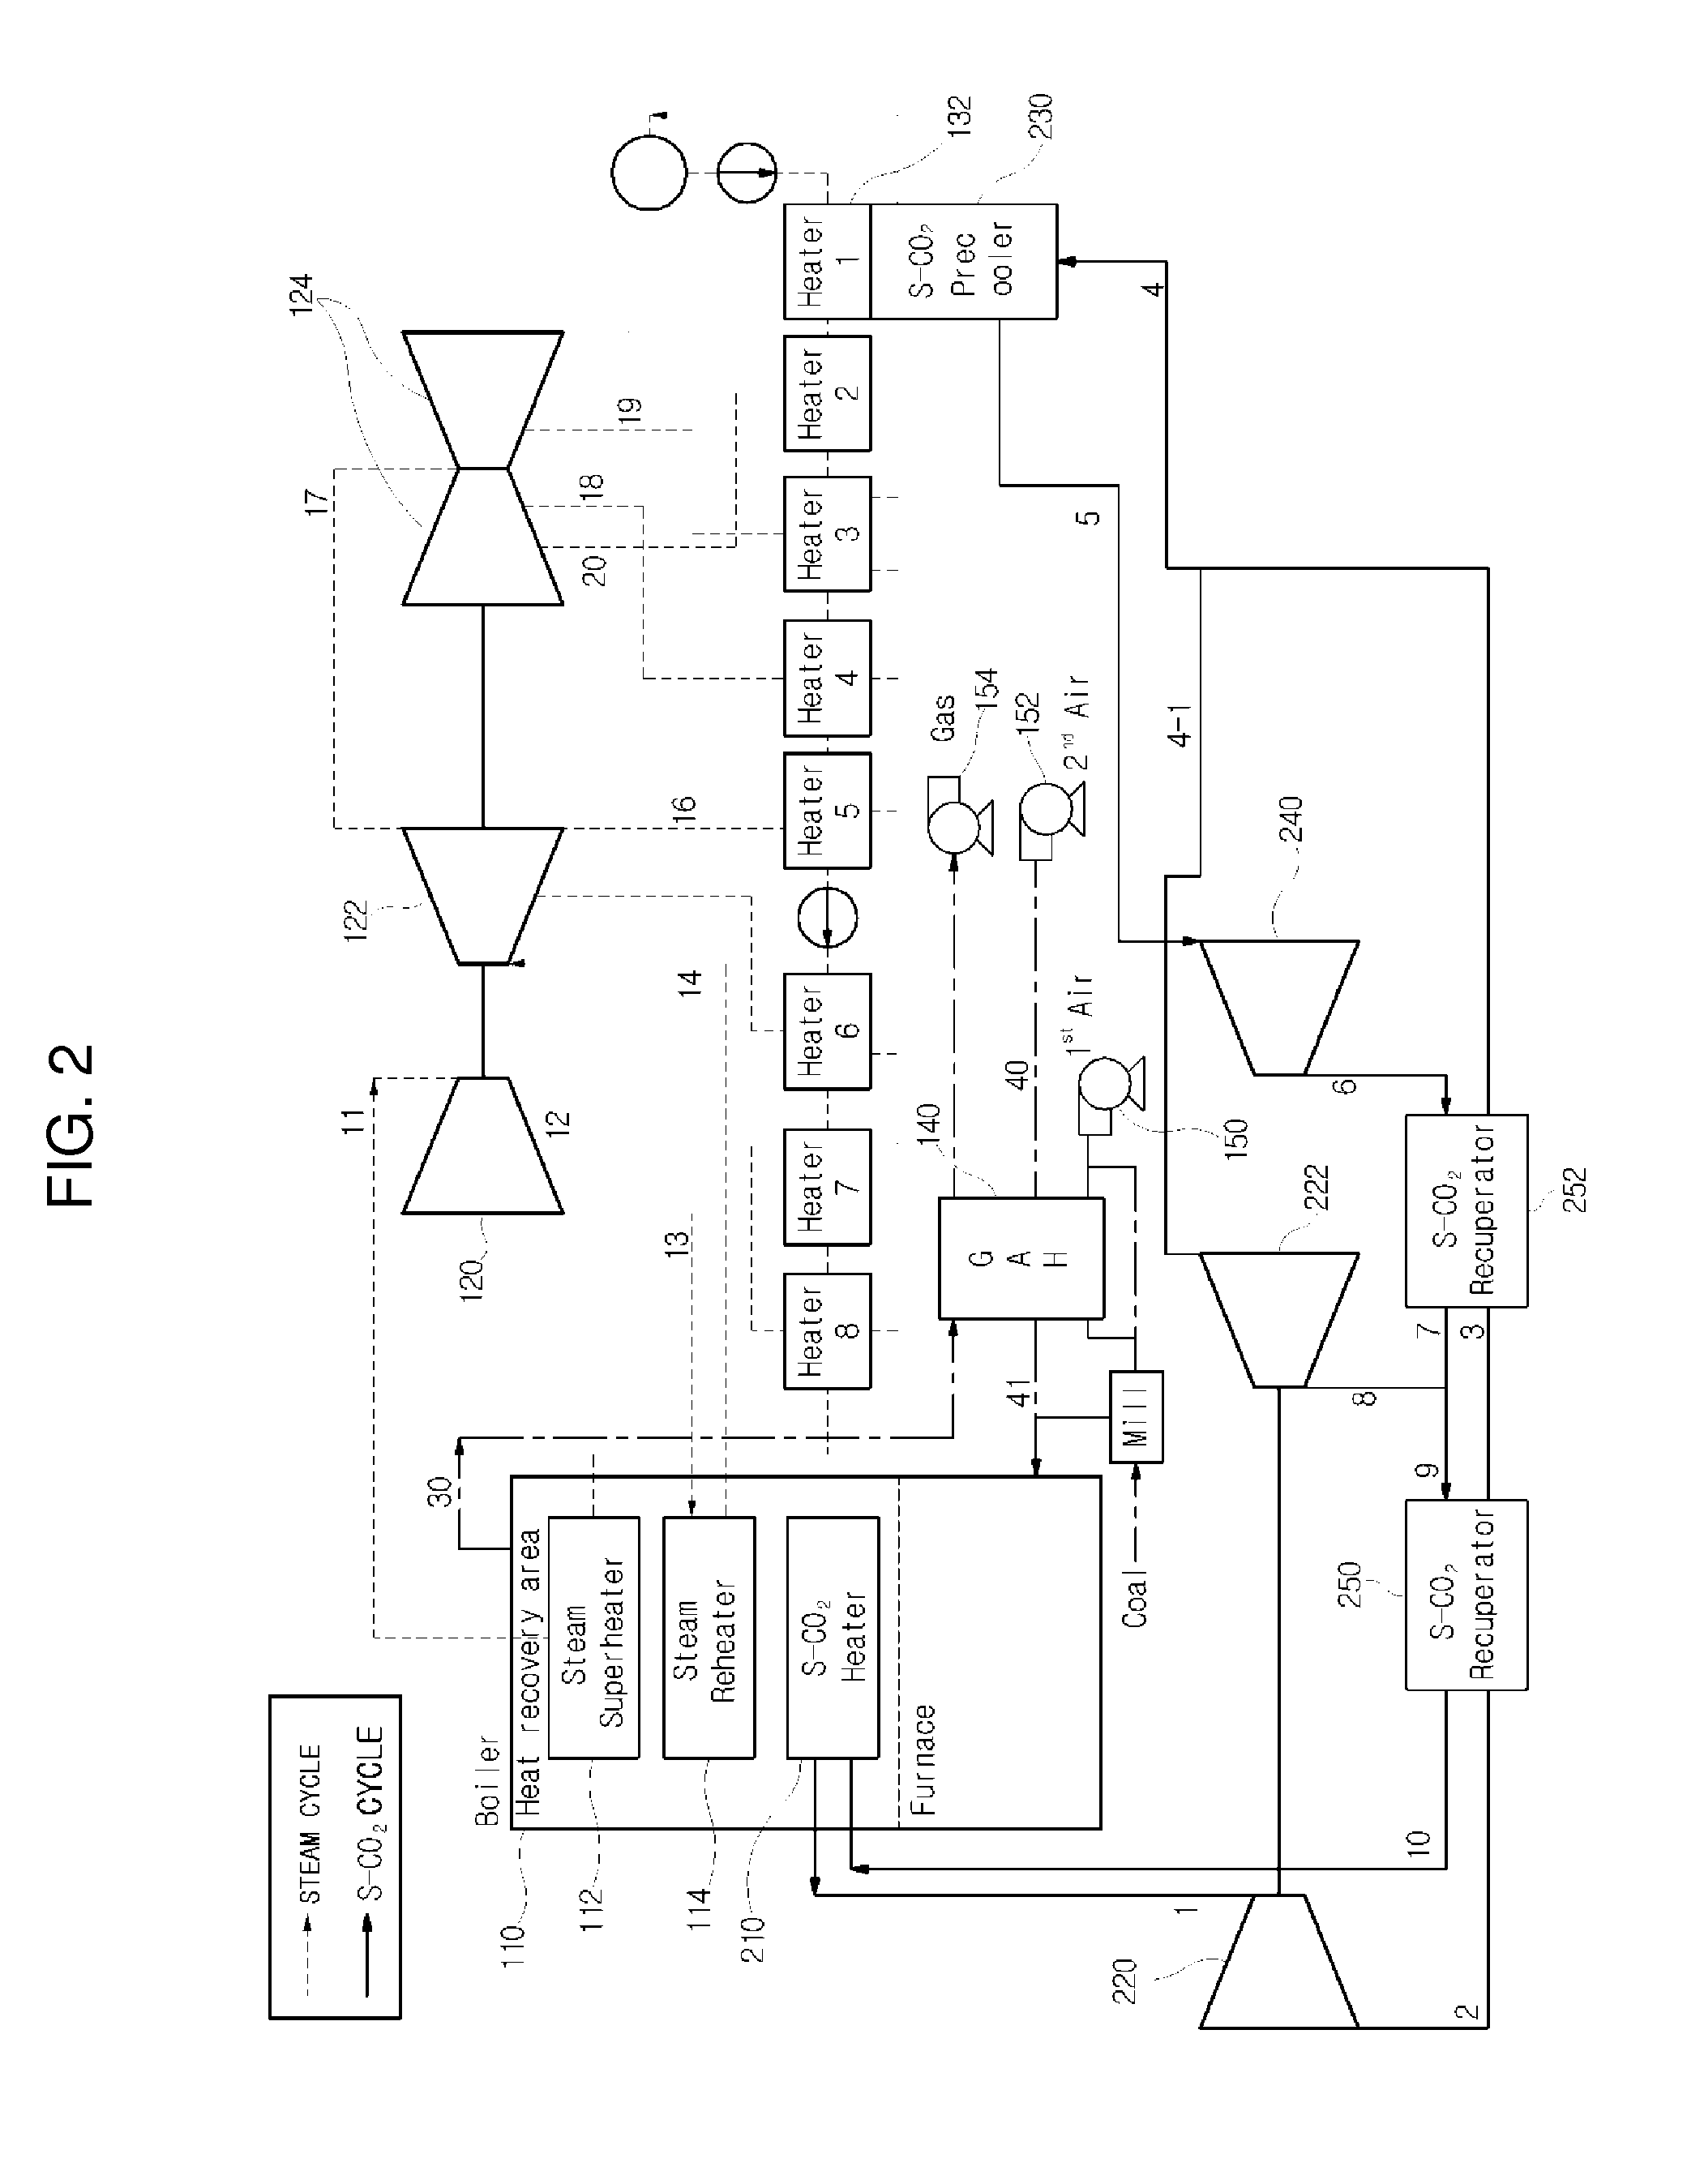 Hybrid power generation system and method using supercritical co2 cycle